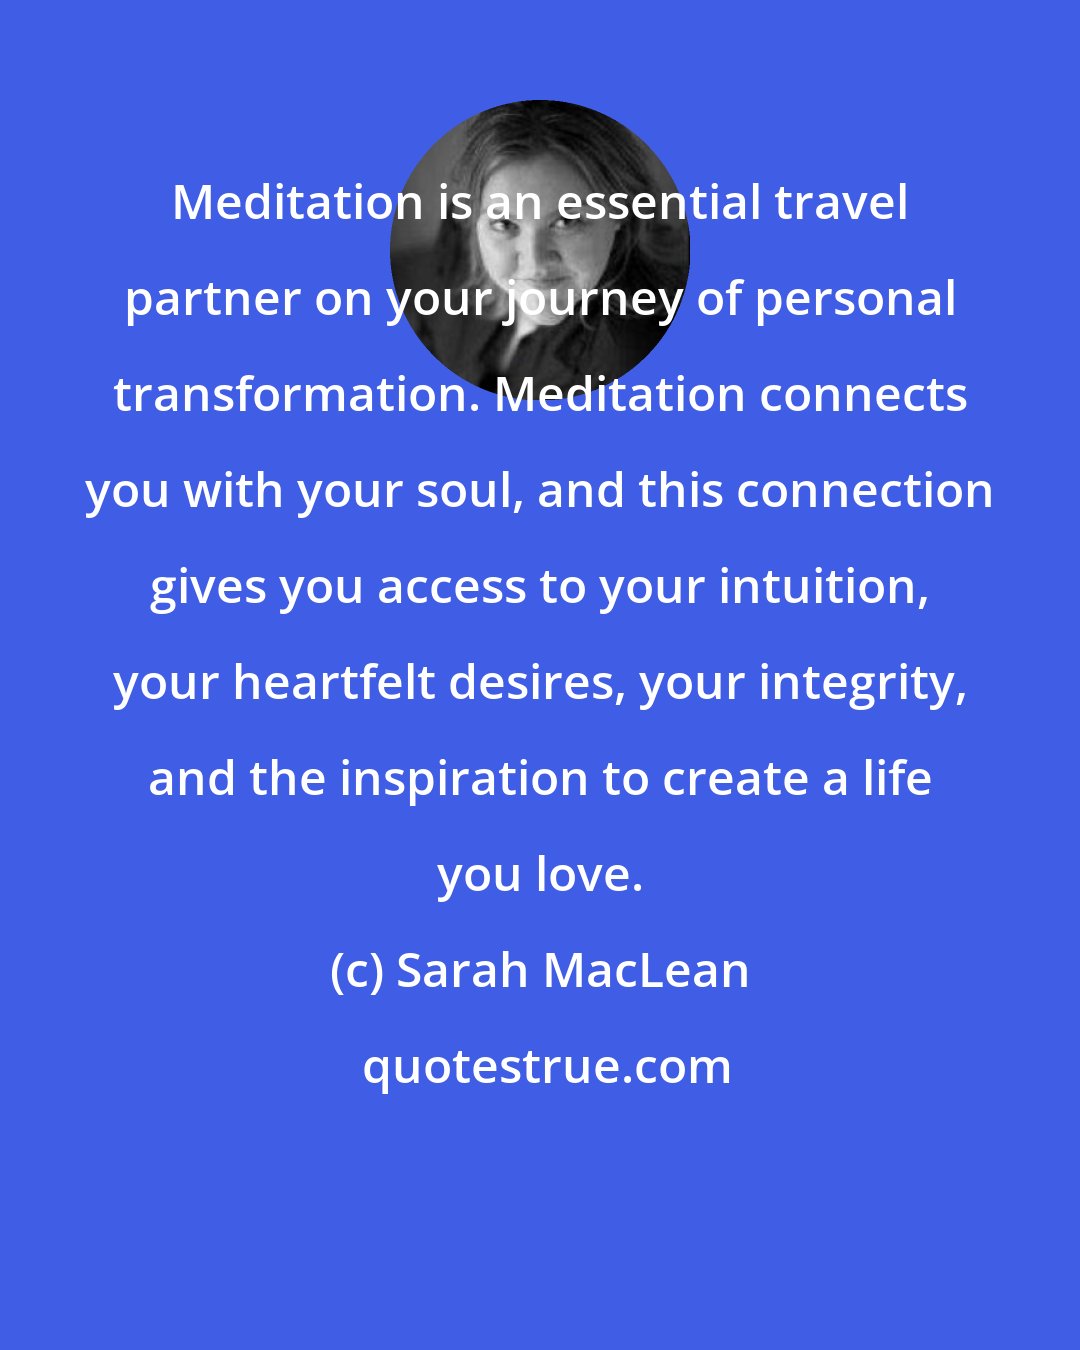 Sarah MacLean: Meditation is an essential travel partner on your journey of personal transformation. Meditation connects you with your soul, and this connection gives you access to your intuition, your heartfelt desires, your integrity, and the inspiration to create a life you love.